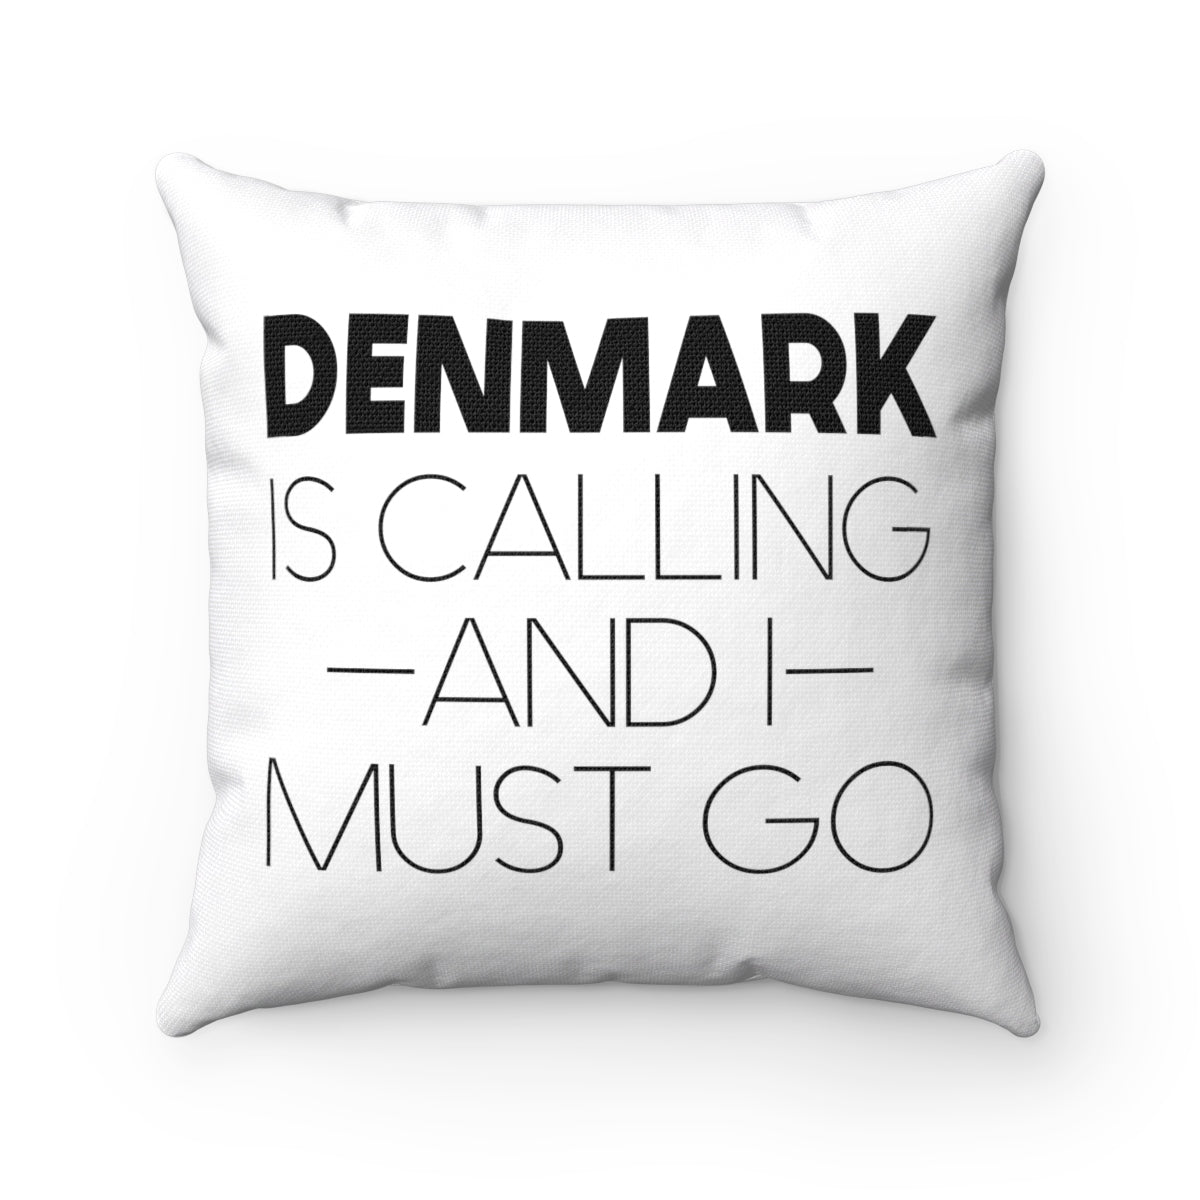 Denmark Is Calling And I Must Go Square Pillow Cover Scandinavian Design Studio